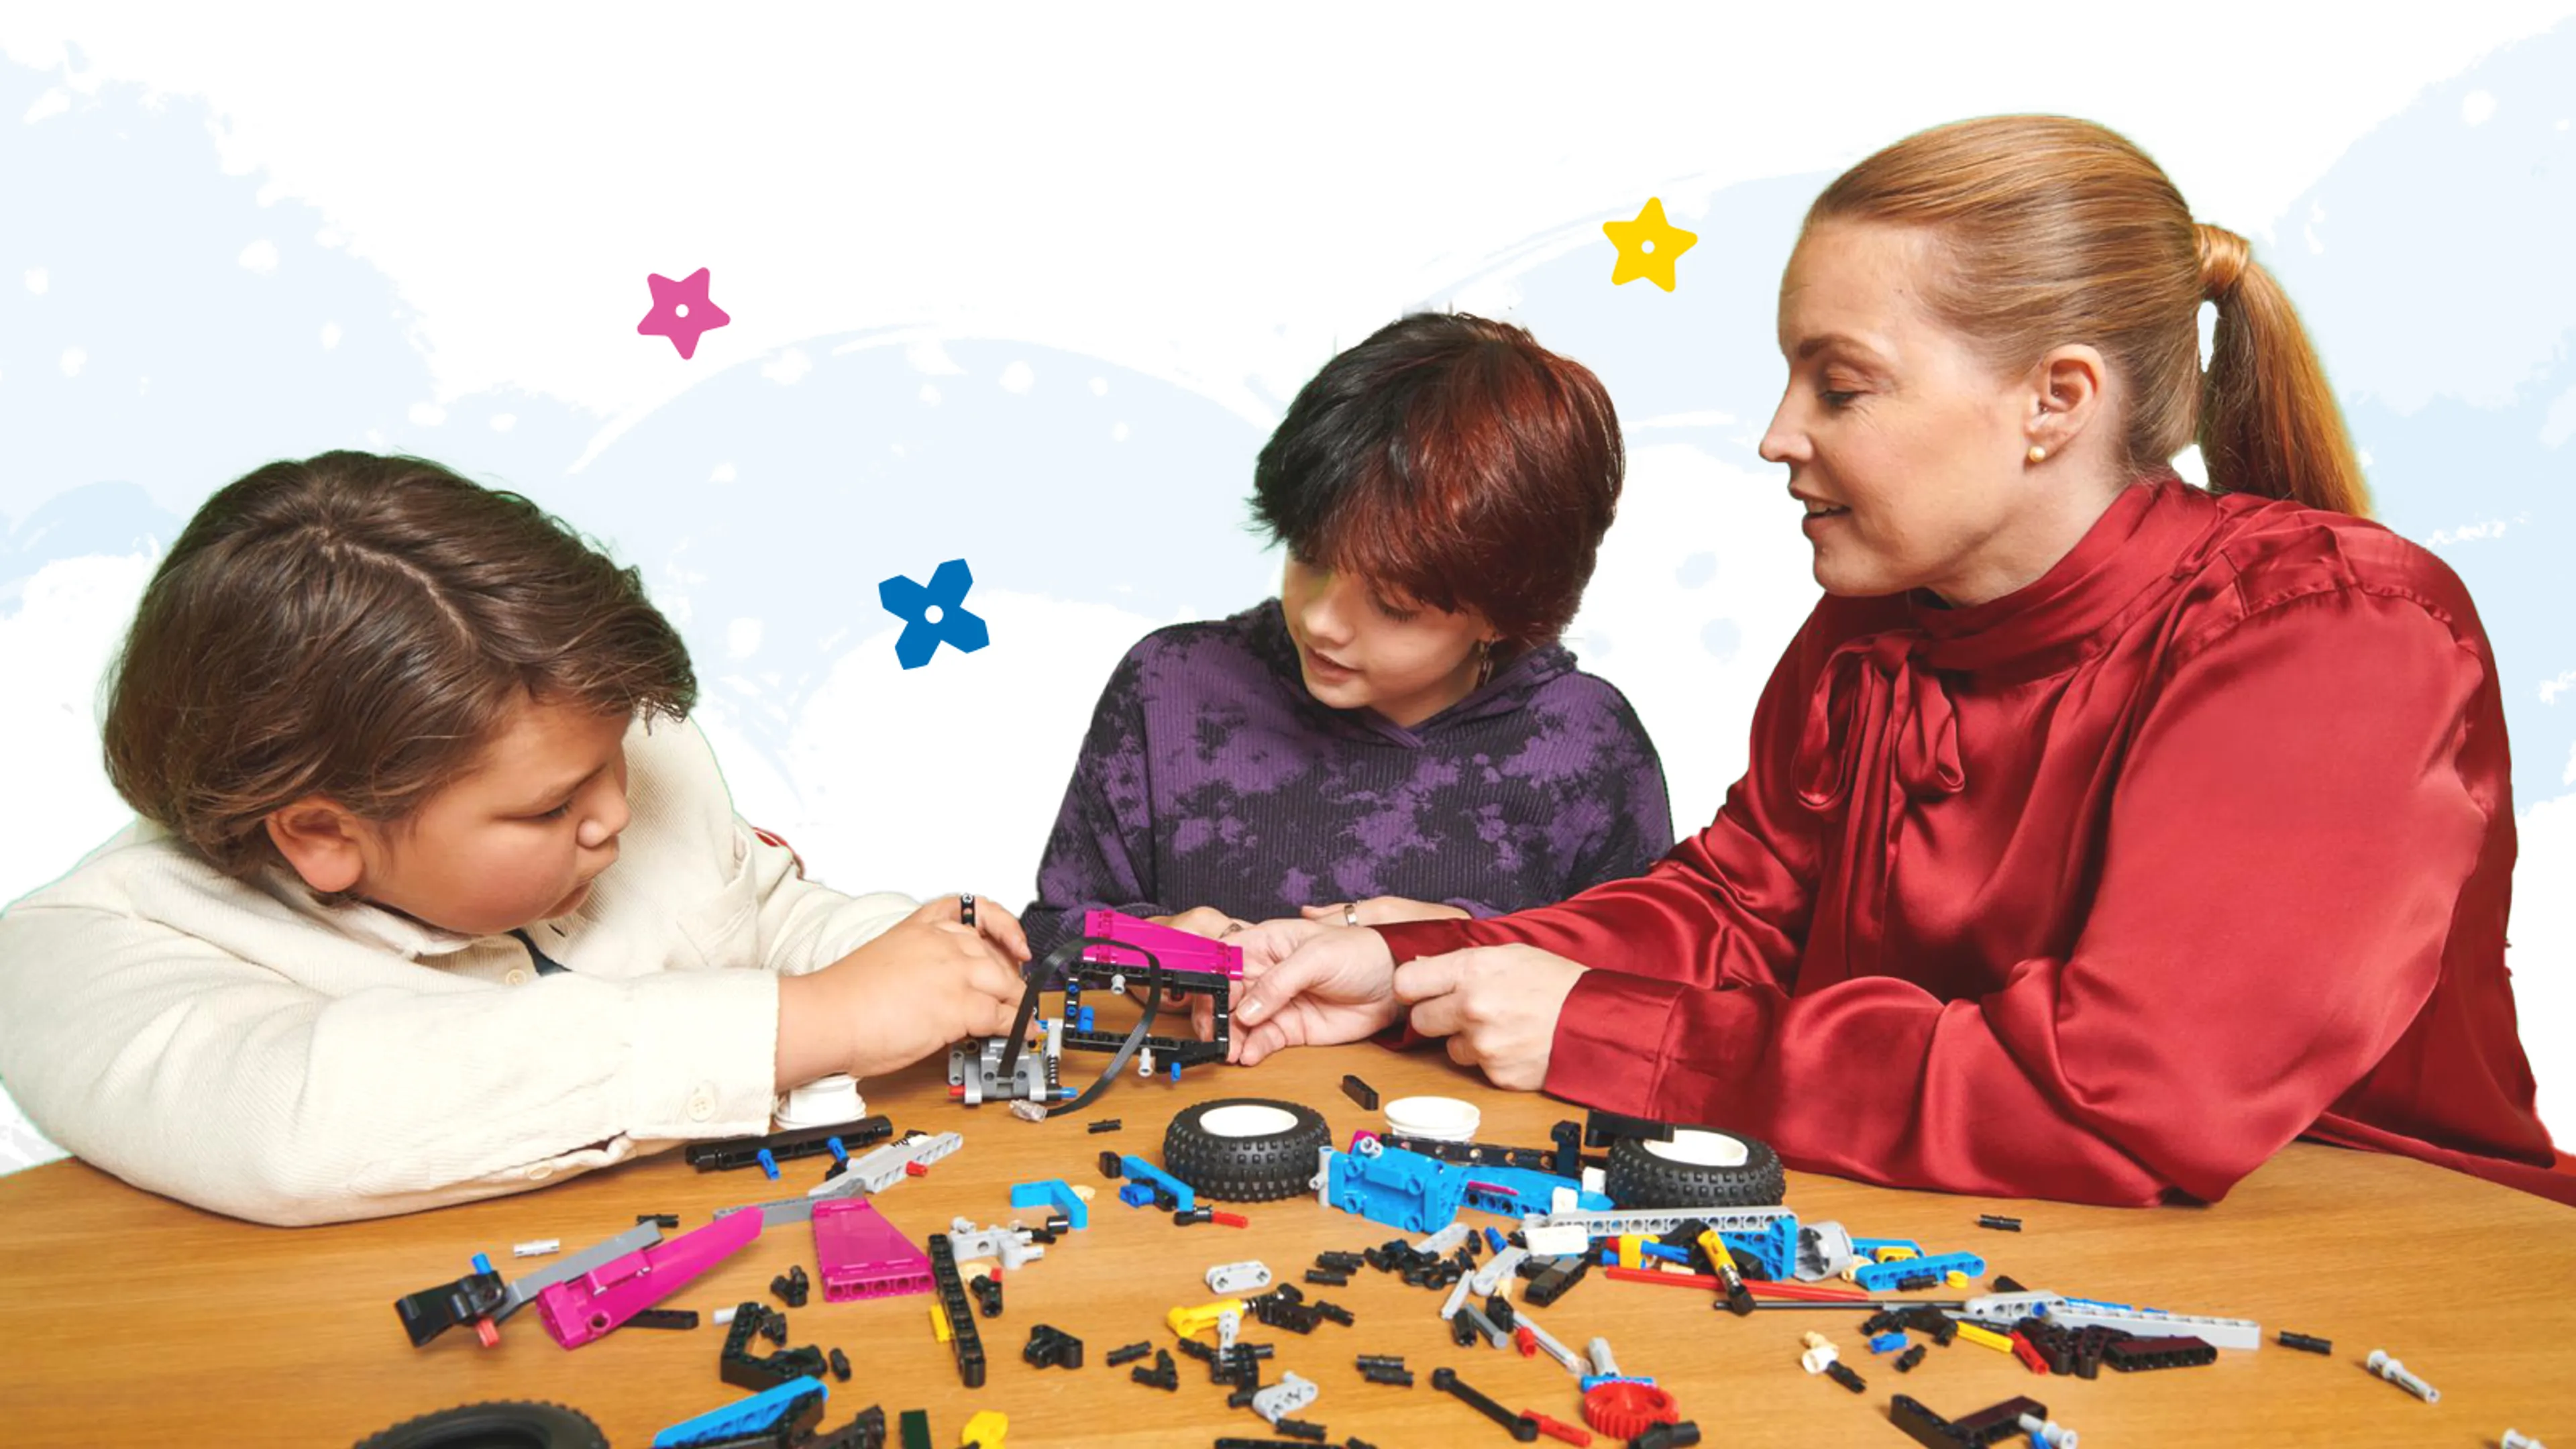 A family playing with LEGO bricks at a table